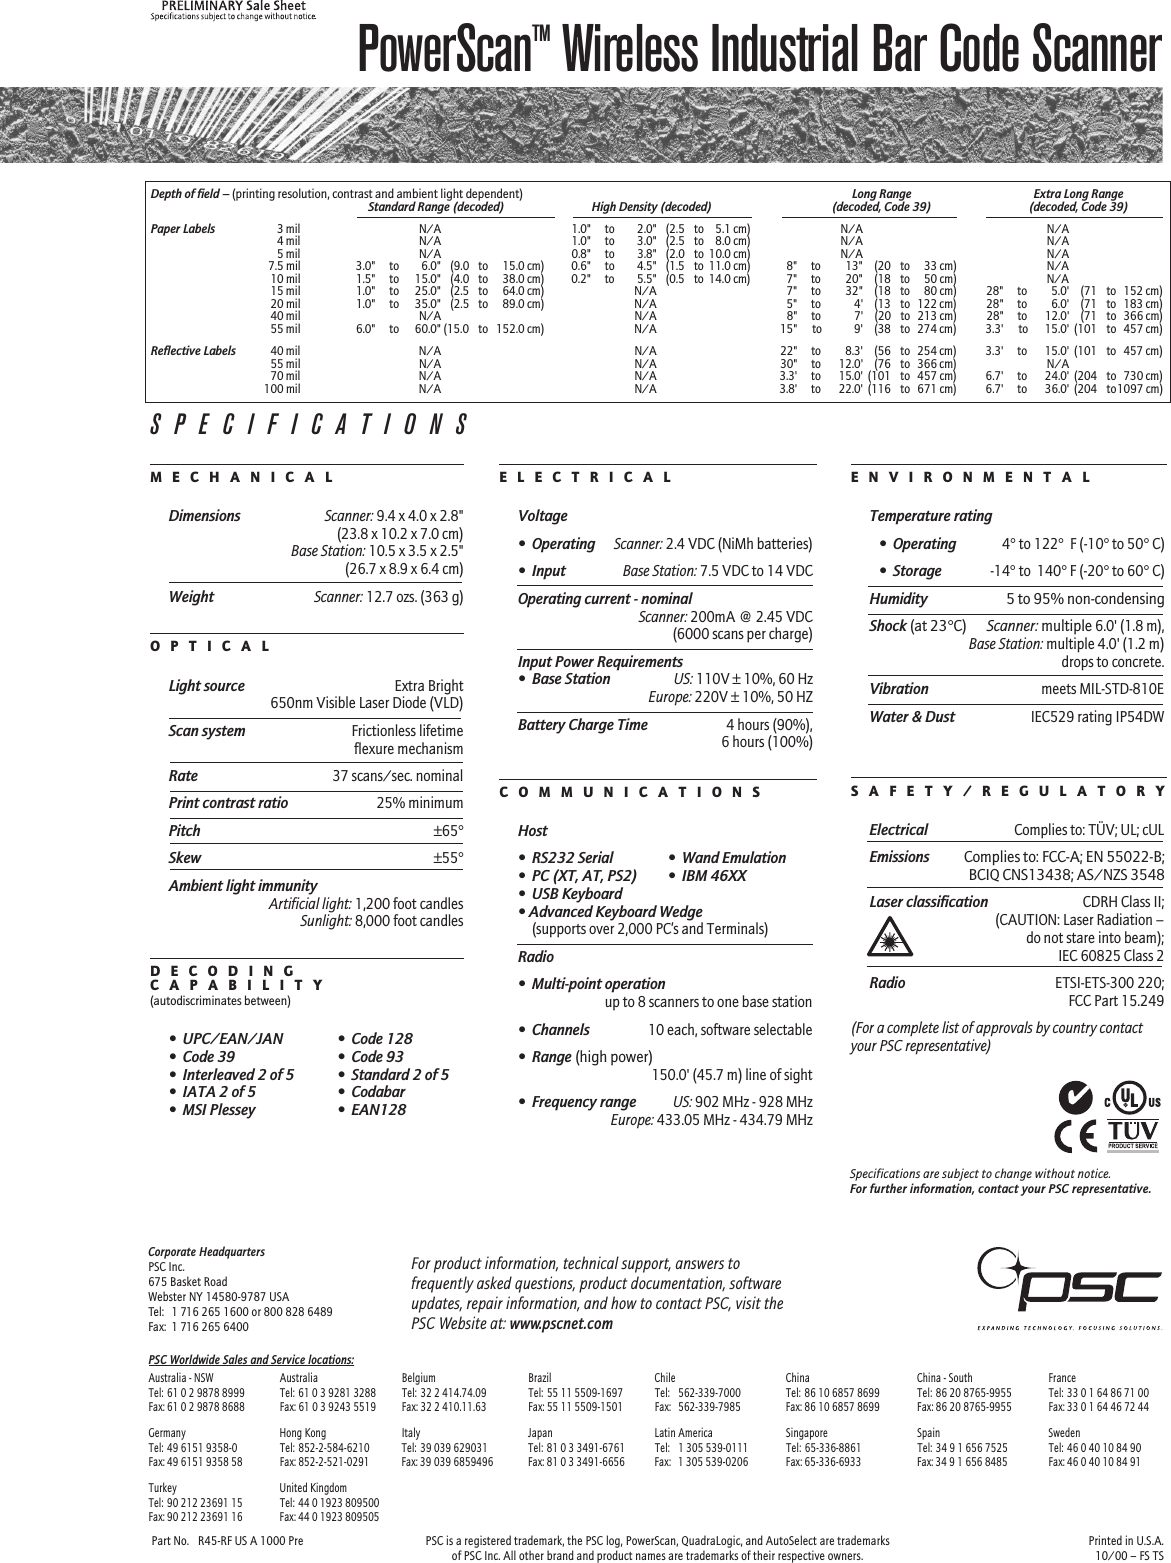 PowerScanTM Wireless Industrial Bar Code ScannerPart No. R45-RF US A 1000 Pre PSC is a registered trademark, the PSC log, PowerScan, QuadraLogic, and AutoSelect are trademarks Printed in U.S.A.of PSC Inc. All other brand and product names are trademarks of their respective owners. 10/00 – FS TSPSC Worldwide Sales and Service locations:Australia - NSW Australia Belgium Brazil Chile China China - South FranceTel: 61 0 2 9878 8999 Tel: 61 0 3 9281 3288 Tel: 32 2 414.74.09 Tel: 55 11 5509-1697 Tel: 562-339-7000 Tel: 86 10 6857 8699 Tel: 86 20 8765-9955 Tel: 33 0 1 64 86 71 00Fax: 61 0 2 9878 8688 Fax: 61 0 3 9243 5519 Fax: 32 2 410.11.63 Fax: 55 11 5509-1501 Fax: 562-339-7985 Fax: 86 10 6857 8699 Fax: 86 20 8765-9955 Fax: 33 0 1 64 46 72 44Germany Hong Kong Italy Japan Latin America Singapore Spain SwedenTel: 49 6151 9358-0 Tel: 852-2-584-6210 Tel: 39 039 629031 Tel: 81 0 3 3491-6761 Tel: 1 305 539-0111 Tel: 65-336-8861 Tel: 34 9 1 656 7525 Tel: 46 0 40 10 84 90Fax: 49 6151 9358 58 Fax: 852-2-521-0291 Fax: 39 039 6859496 Fax: 81 0 3 3491-6656 Fax: 1 305 539-0206 Fax: 65-336-6933 Fax: 34 9 1 656 8485 Fax: 46 0 40 10 84 91Turkey United KingdomTel: 90 212 23691 15 Tel: 44 0 1923 809500Fax: 90 212 23691 16 Fax: 44 0 1923 809505Corporate HeadquartersPSC Inc.675 Basket RoadWebster NY 14580-9787 USATel: 1 716 265 1600 or 800 828 6489Fax: 1 716 265 6400For product information, technical support, answers tofrequently asked questions, product documentation, softwareupdates, repair information, and how to contact PSC, visit thePSC Website at: www.pscnet.comDepth of field – (printing resolution, contrast and ambient light dependent) Long Range Extra Long RangeStandard Range (decoded) High Density (decoded) (decoded, Code 39) (decoded, Code 39)Paper Labels3 mil N/A 1.0&quot; to 2.0&quot; (2.5 to 5.1 cm) N/A N/A4 mil N/A 1.0&quot; to 3.0&quot; (2.5 to 8.0 cm) N/A N/A5 mil N/A 0.8&quot; to 3.8&quot; (2.0 to 10.0 cm) N/A N/A7.5 mil 3.0&quot; to 6.0&quot; (9.0 to 15.0 cm) 0.6&quot; to 4.5&quot; (1.5 to 11.0 cm) 8&quot; to 13&quot; (20 to 33 cm) N/A10 mil 1.5&quot; to 15.0&quot; (4.0 to 38.0 cm) 0.2&quot; to 5.5&quot; (0.5 to 14.0 cm) 7&quot; to 20&quot; (18 to 50 cm) N/A15 mil 1.0&quot; to 25.0&quot; (2.5 to 64.0 cm) N/A 7&quot; to 32&quot; (18 to 80 cm) 28&quot; to 5.0&apos; (71 to 152 cm)20 mil 1.0&quot; to 35.0&quot; (2.5 to 89.0 cm) N/A 5&quot; to 4&apos; (13 to 122 cm) 28&quot; to 6.0&apos; (71 to 183 cm)40 mil N/A N/A 8&quot; to 7&apos; (20 to 213 cm) 28&quot; to 12.0&apos; (71 to 366 cm)55 mil 6.0&quot; to 60.0&quot; (15.0 to 152.0 cm) N/A 15&quot;  to 9&apos; (38 to 274 cm) 3.3&apos;  to 15.0&apos; (101 to 457 cm)Reflective Labels40 mil N/A N/A 22&quot; to 8.3&apos; (56 to 254 cm) 3.3&apos; to 15.0&apos; (101 to 457 cm)55 mil N/A N/A 30&quot; to 12.0&apos; (76 to 366 cm) N/A70 mil N/A N/A 3.3&apos; to 15.0&apos; (101 to 457 cm) 6.7&apos; to 24.0&apos; (204 to 730 cm)100 mil N/A N/A 3.8&apos; to 22.0&apos; (116 to 671 cm) 6.7&apos; to 36.0&apos; (204 to1097 cm)M  E  C  H  A  N  I  C  A  LDimensionsScanner: 9.4 x 4.0 x 2.8&quot;(23.8 x 10.2 x 7.0 cm)Base Station: 10.5 x 3.5 x 2.5&quot;(26.7 x 8.9 x 6.4 cm)WeightScanner: 12.7 ozs. (363 g)O  P  T  I  C  A  LLight sourceExtra Bright650nm Visible Laser Diode (VLD)Scan systemFrictionless lifetimeflexure mechanismRate37 scans/sec. nominalPrint contrast ratio25% minimumPitch±65°Skew±55°Ambient light immunityArtificial light: 1,200 foot candlesSunlight: 8,000 foot candlesD  E  C  O  D  I  N  GC  A  P  A  B  I  L  I  T  Y(autodiscriminates between)•UPC/EAN/JAN •Code 128•Code 39 •Code 93•Interleaved 2 of 5 •Standard 2 of 5•IATA 2 of 5 •Codabar•MSI Plessey •EAN128E  L  E  C  T  R  I  C  A  LVoltage•OperatingScanner: 2.4 VDC (NiMh batteries)•InputBase Station: 7.5 VDC to 14 VDCOperating current - nominalScanner: 200mA @ 2.45 VDC(6000 scans per charge)Input Power Requirements•Base StationUS: 110V ± 10%, 60 HzEurope: 220V ± 10%, 50 HZBattery Charge Time4 hours (90%),6 hours (100%)C  O  M  M  U  N  I  C  A  T  I  O  N  SHost•RS232 Serial •Wand Emulation•PC (XT, AT, PS2) •IBM 46XX•USB Keyboard• Advanced Keyboard Wedge(supports over 2,000 PC’s and Terminals)Radio•Multi-point operationup to 8 scanners to one base station•Channels10 each, software selectable•Range (high power)150.0&apos; (45.7 m) line of sight•Frequency rangeUS: 902 MHz - 928 MHzEurope: 433.05 MHz - 434.79 MHzE  N  V  I  R  O  N  M  E  N  T  A  LTemperature rating•Operating4° to 122°  F (-10° to 50° C)•Storage-14° to  140° F (-20° to 60° C)Humidity 5 to 95% non-condensingShock (at 23°C) Scanner: multiple 6.0&apos; (1.8 m),Base Station: multiple 4.0&apos; (1.2 m)drops to concrete.Vibrationmeets MIL-STD-810EWater &amp; DustIEC529 rating IP54DWS  A  F  E  T  Y  /  R  E  G  U  L  A  T  O  R  YElectricalComplies to: TÜV; UL; cULEmissions Complies to: FCC-A; EN 55022-B;BCIQ CNS13438; AS/NZS 3548Laser classificationCDRH Class II;(CAUTION: Laser Radiation –do not stare into beam);IEC 60825 Class 2RadioETSI-ETS-300 220;FCC Part 15.249(For a complete list of approvals by country contactyour PSC representative)SPECIFICATIONSSpecifications are subject to change without notice.For further information, contact your PSC representative.